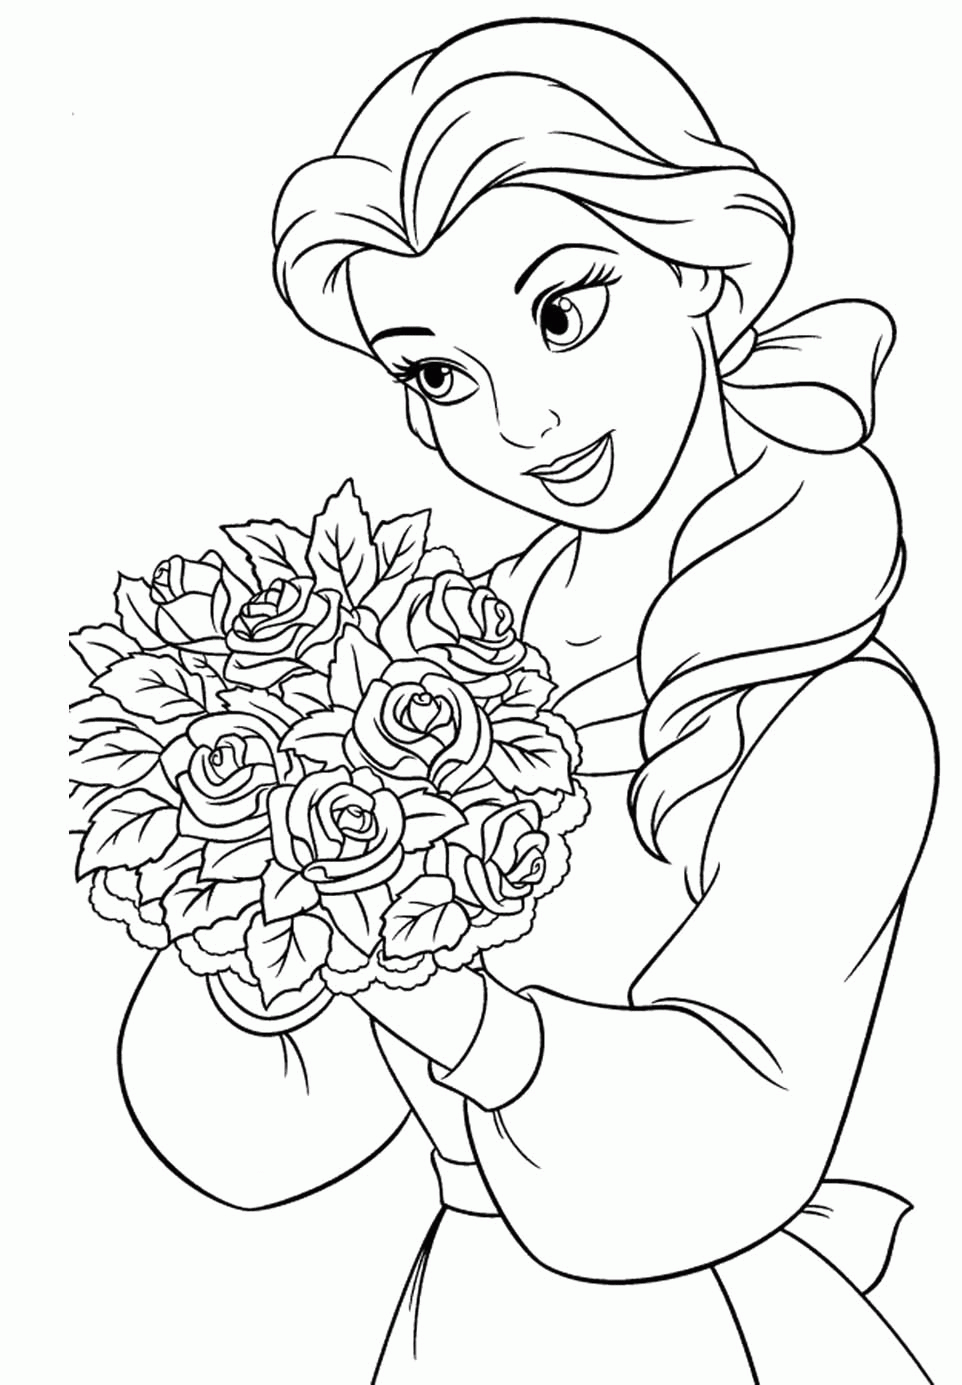 tier-disney-princess-color-pages-bell-coloring-online-clip-art-library